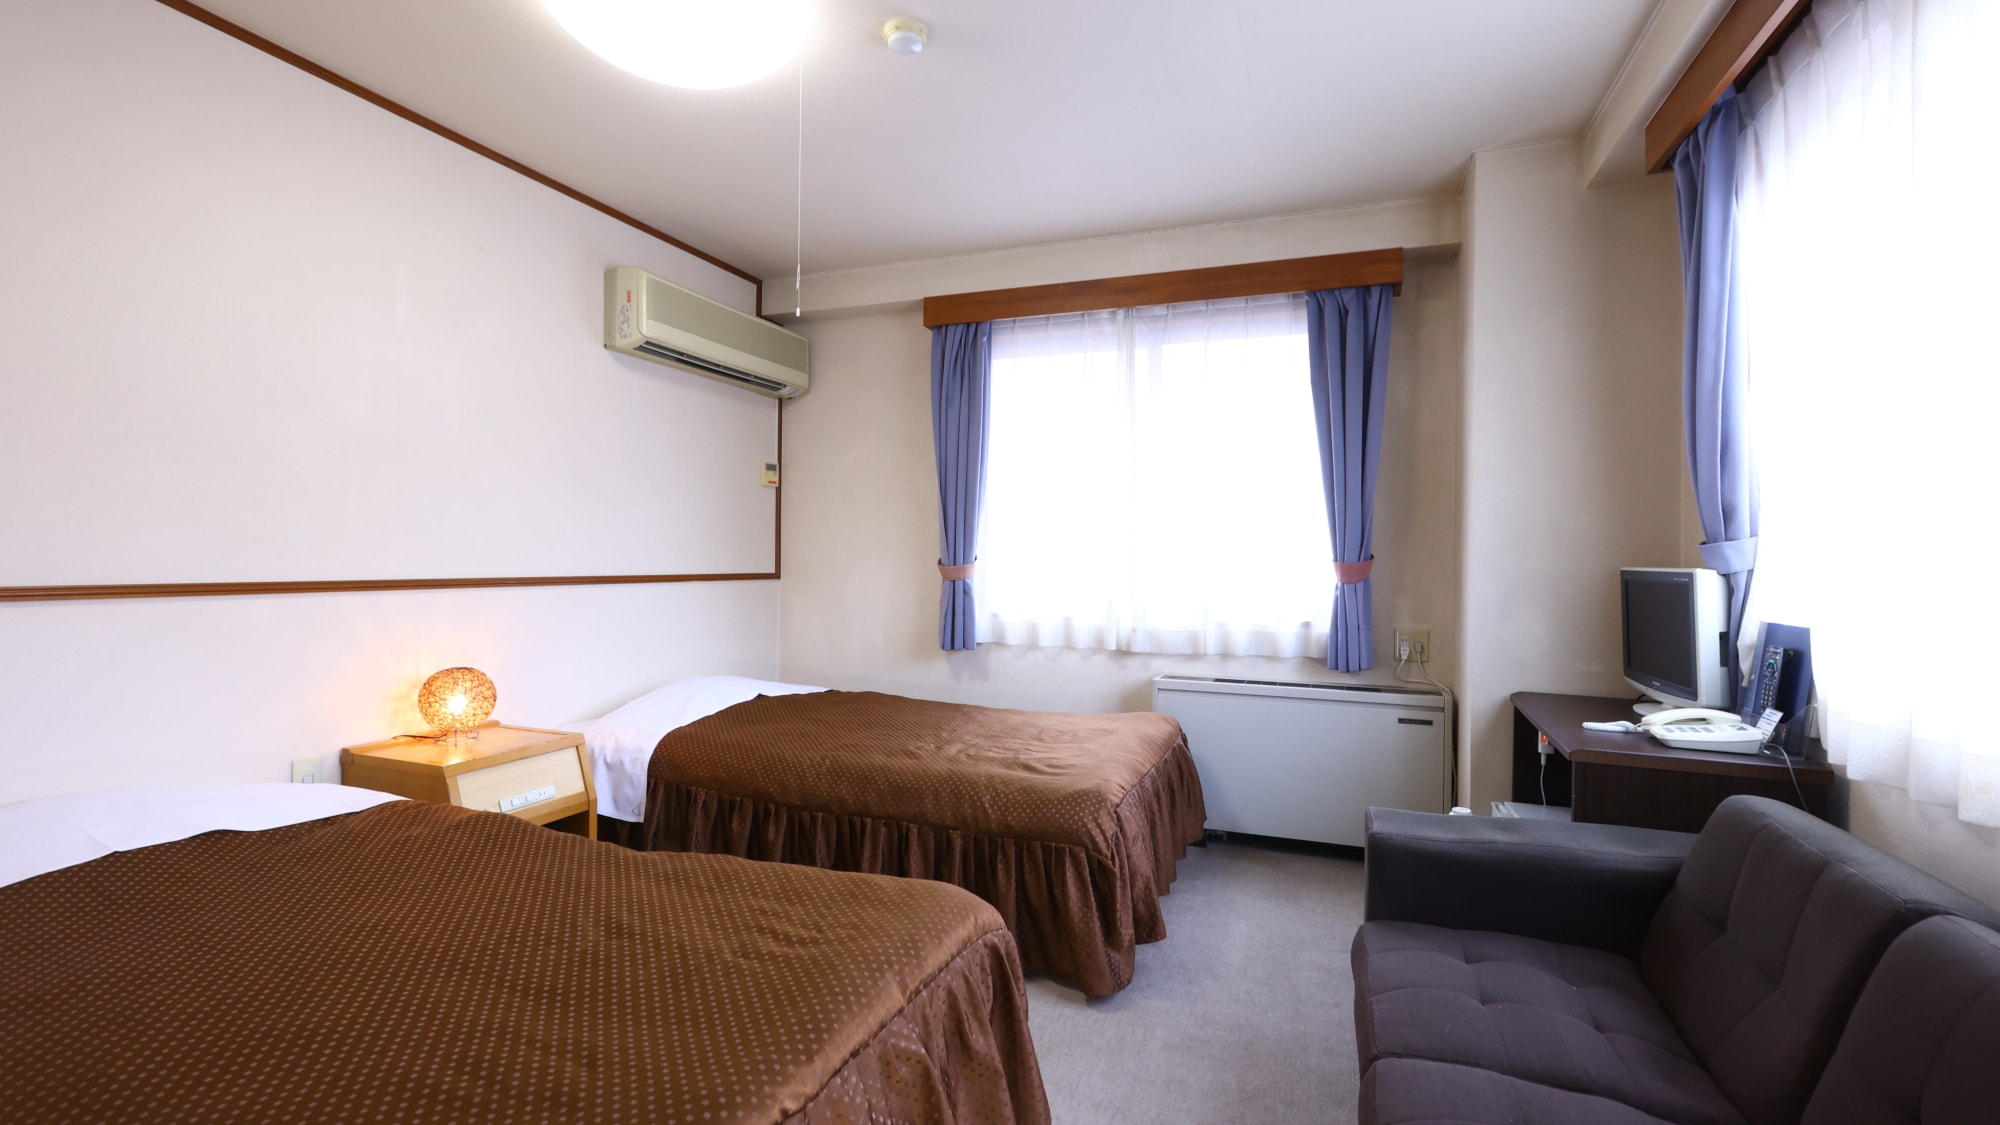 An example of a Western-style twin room. Equipped with air conditioning. Please relax slowly.